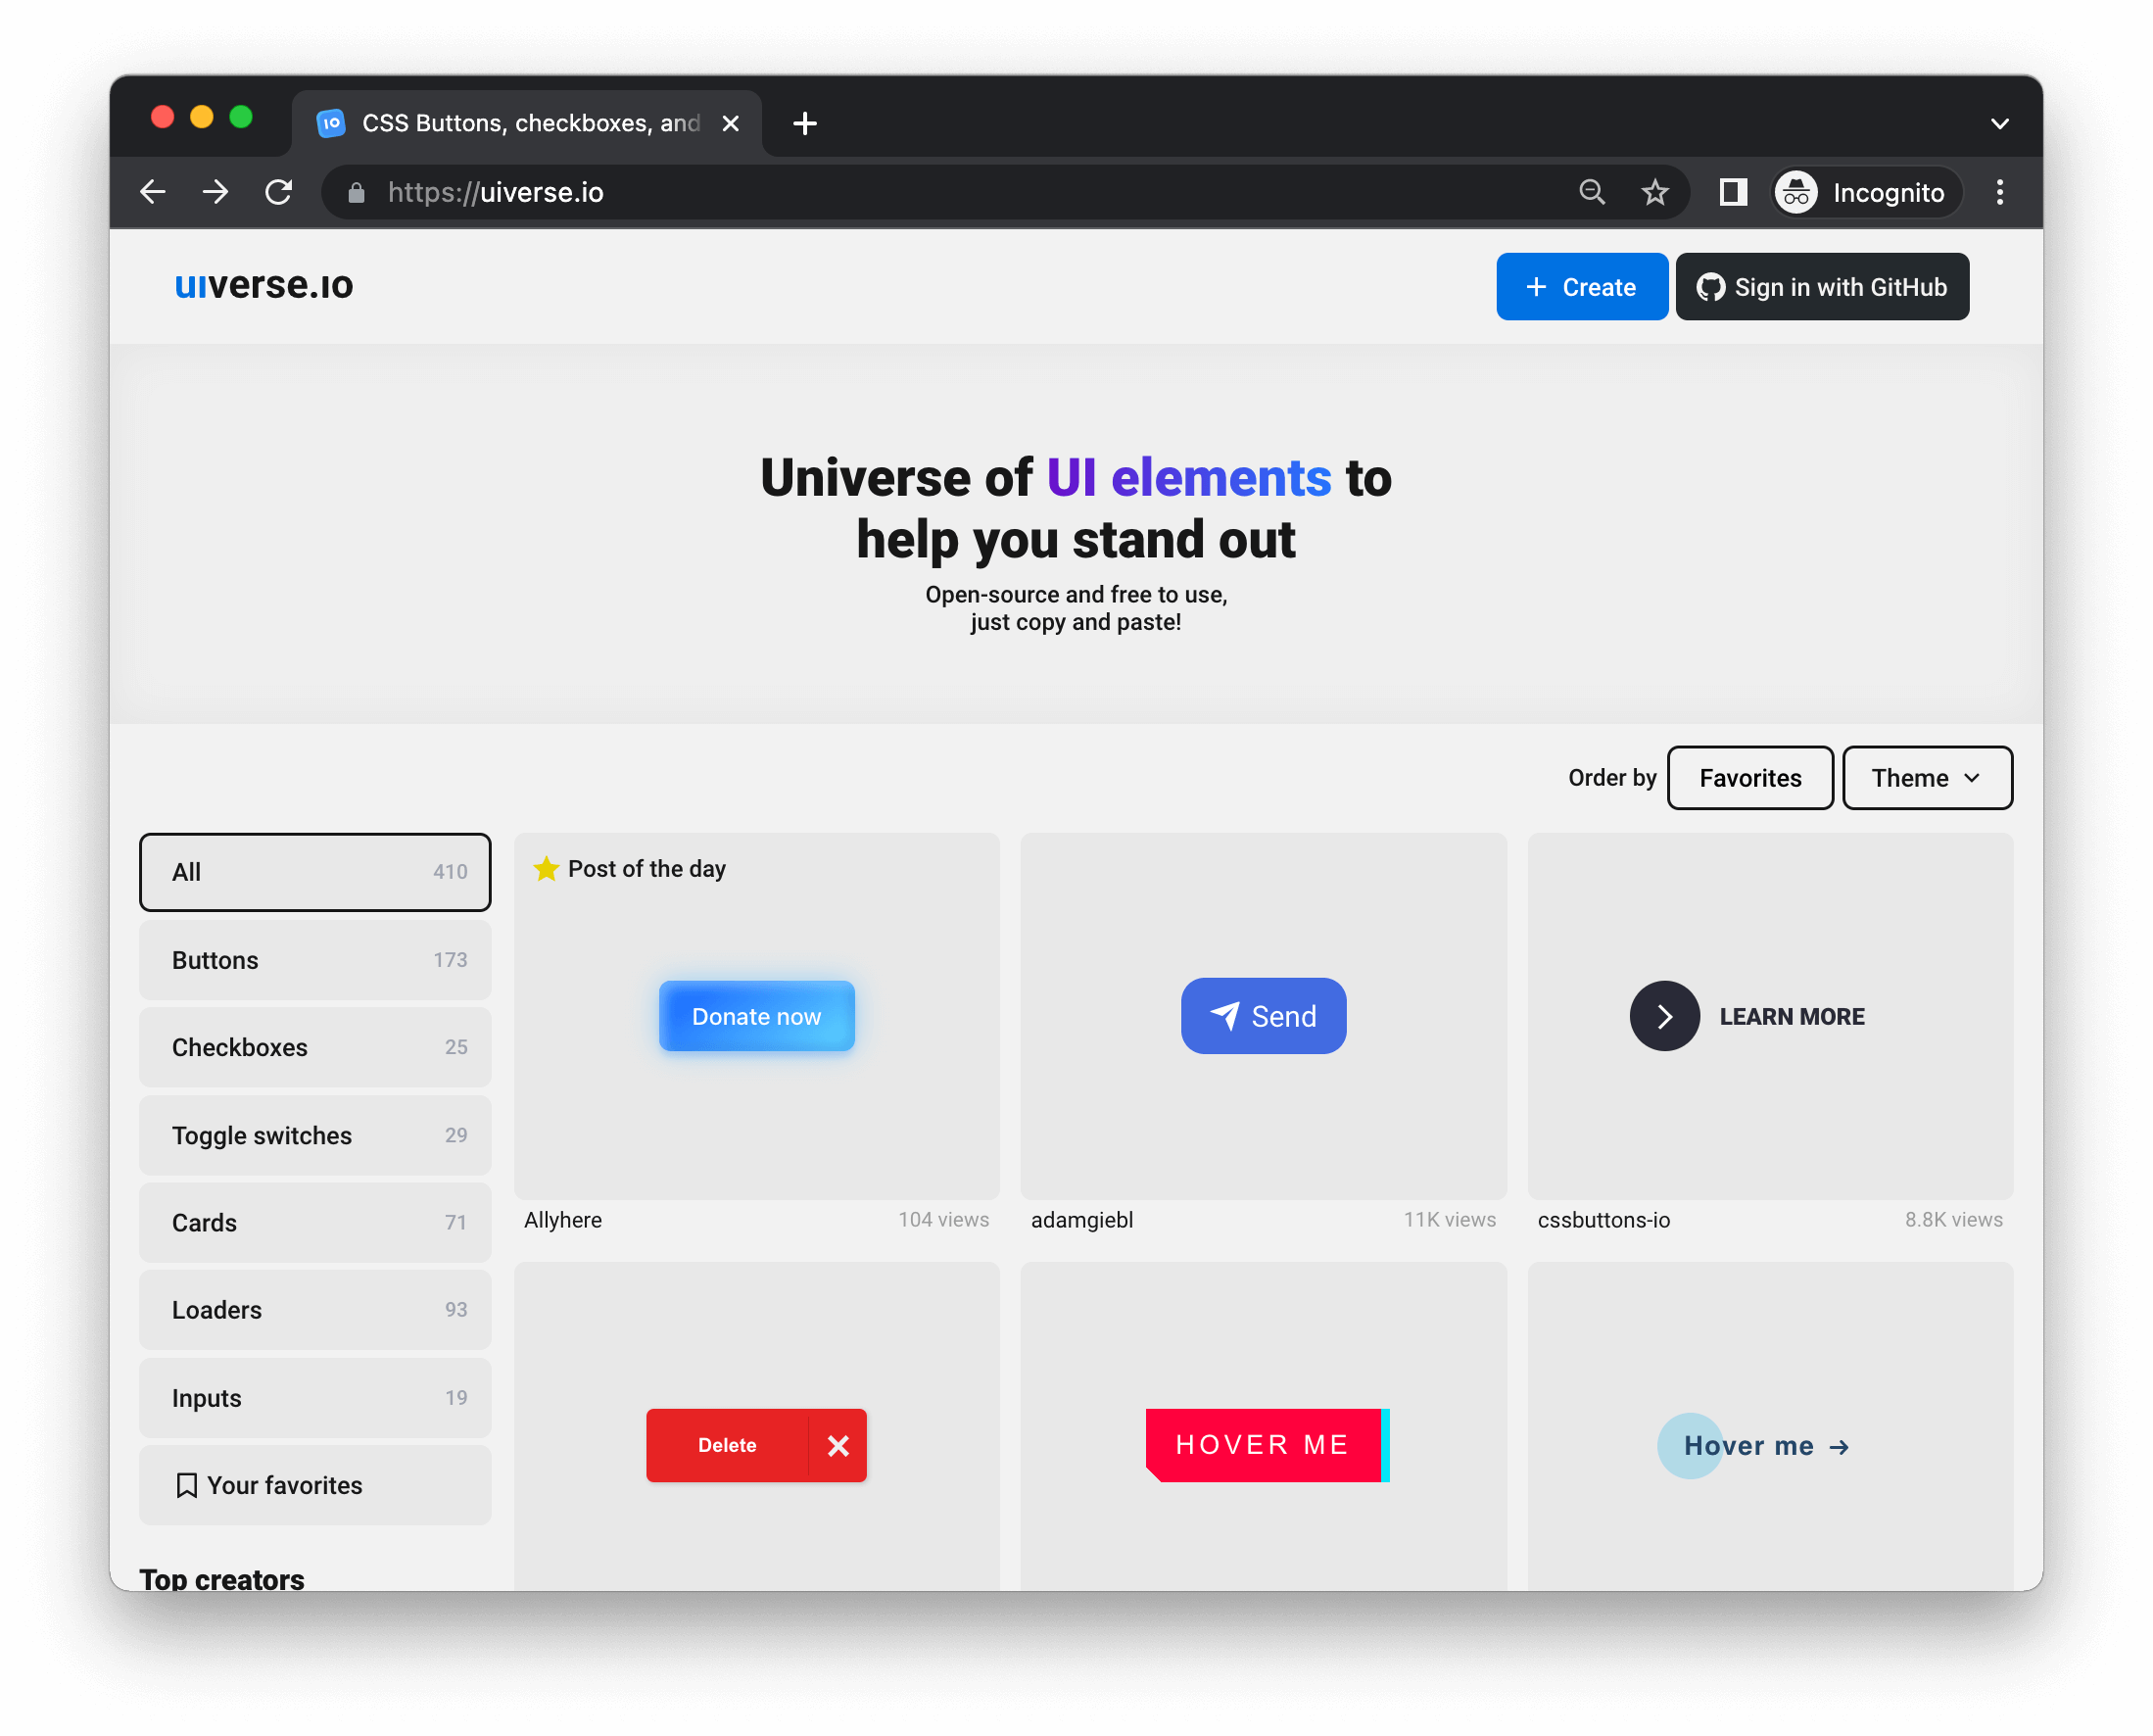 uiverse.io - Universe of UI elements made with HTML & CSS